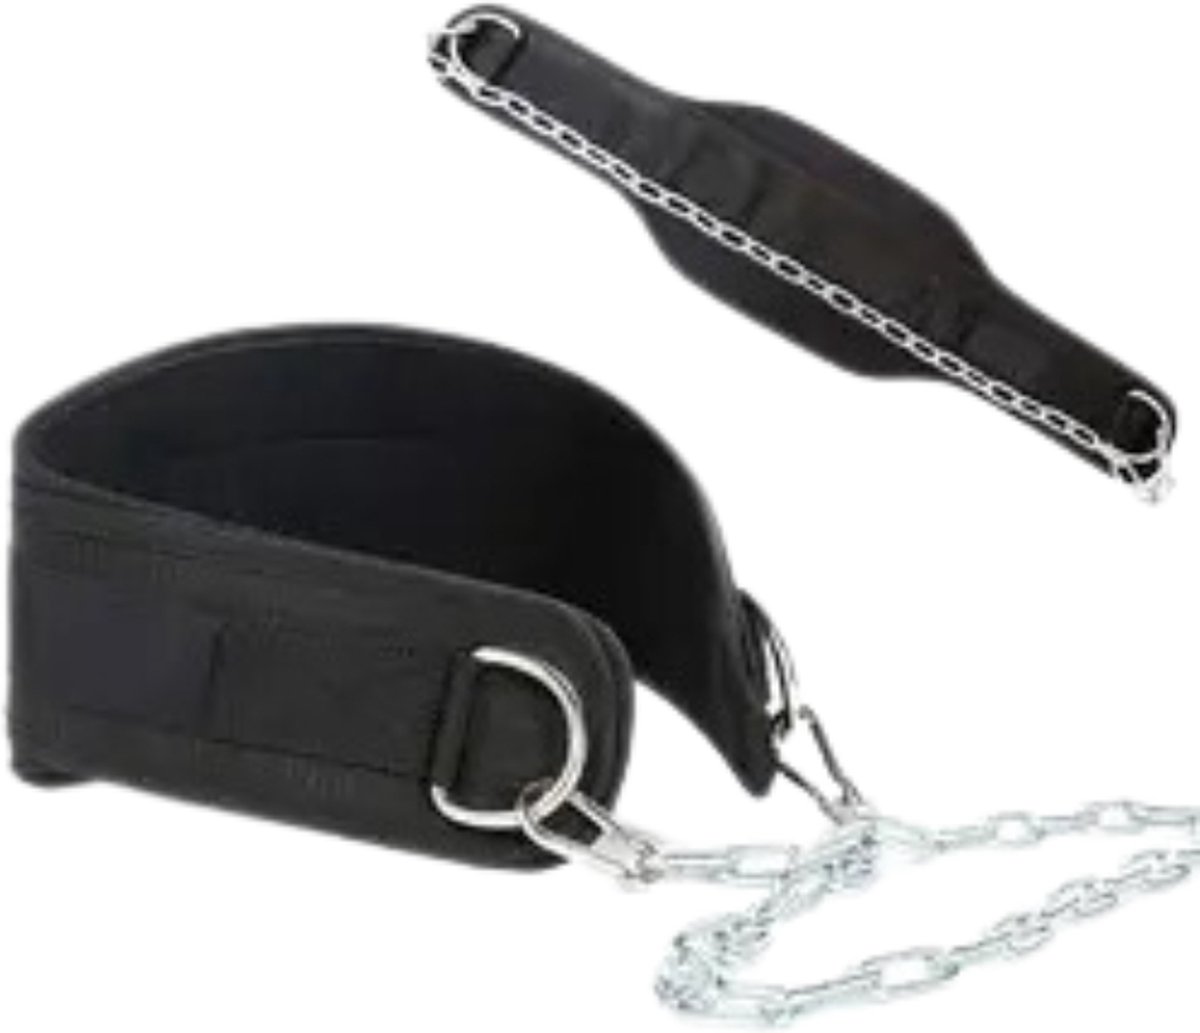 Unscripted Fate - Dipping Belt - 200kg Weight Capacity - Elastic Neoprene - Adjustable Steel Chain - One Size - All Black